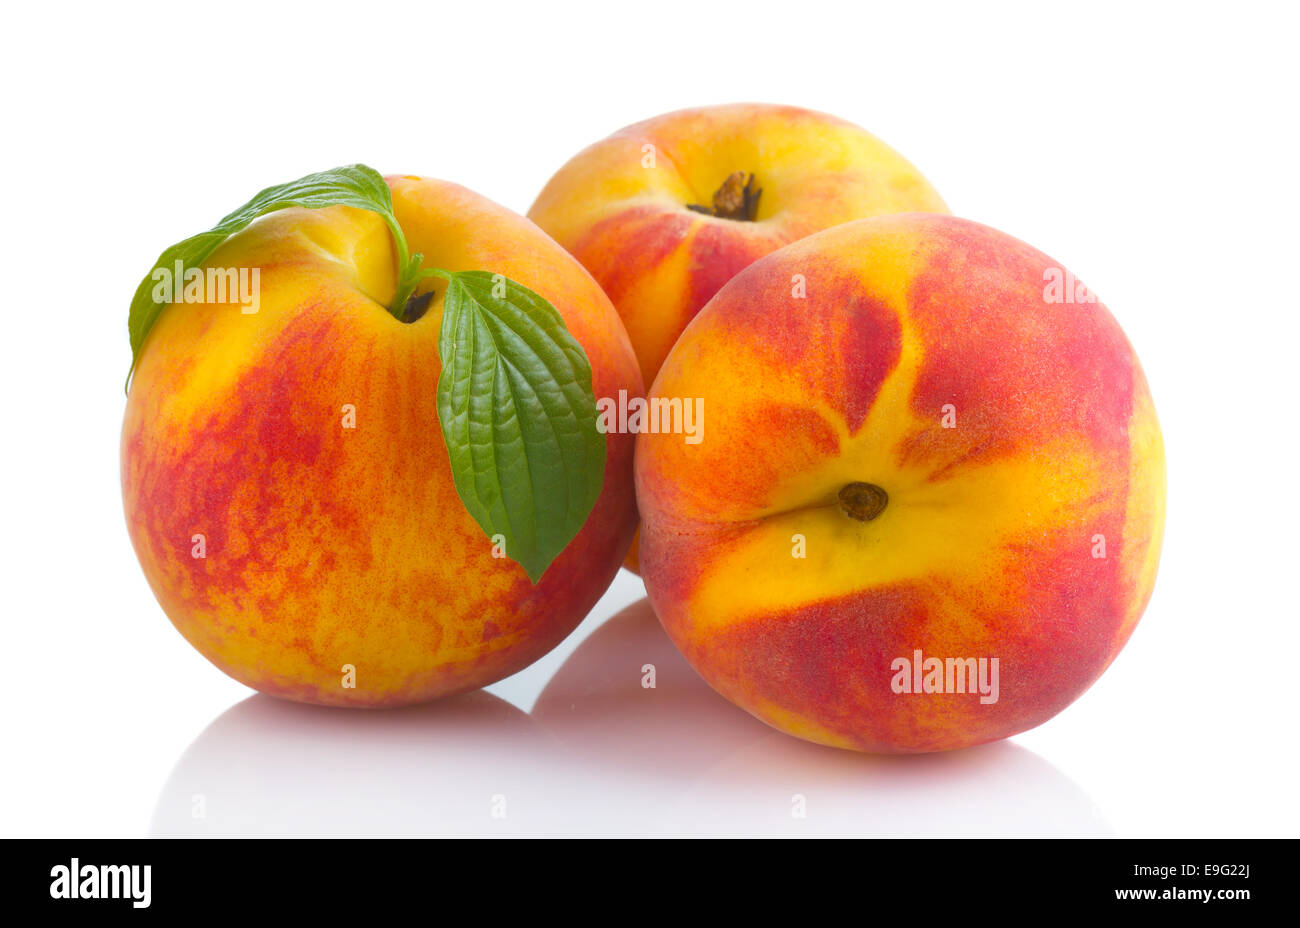 Ripe peach fruits with green leave isolated Stock Photo